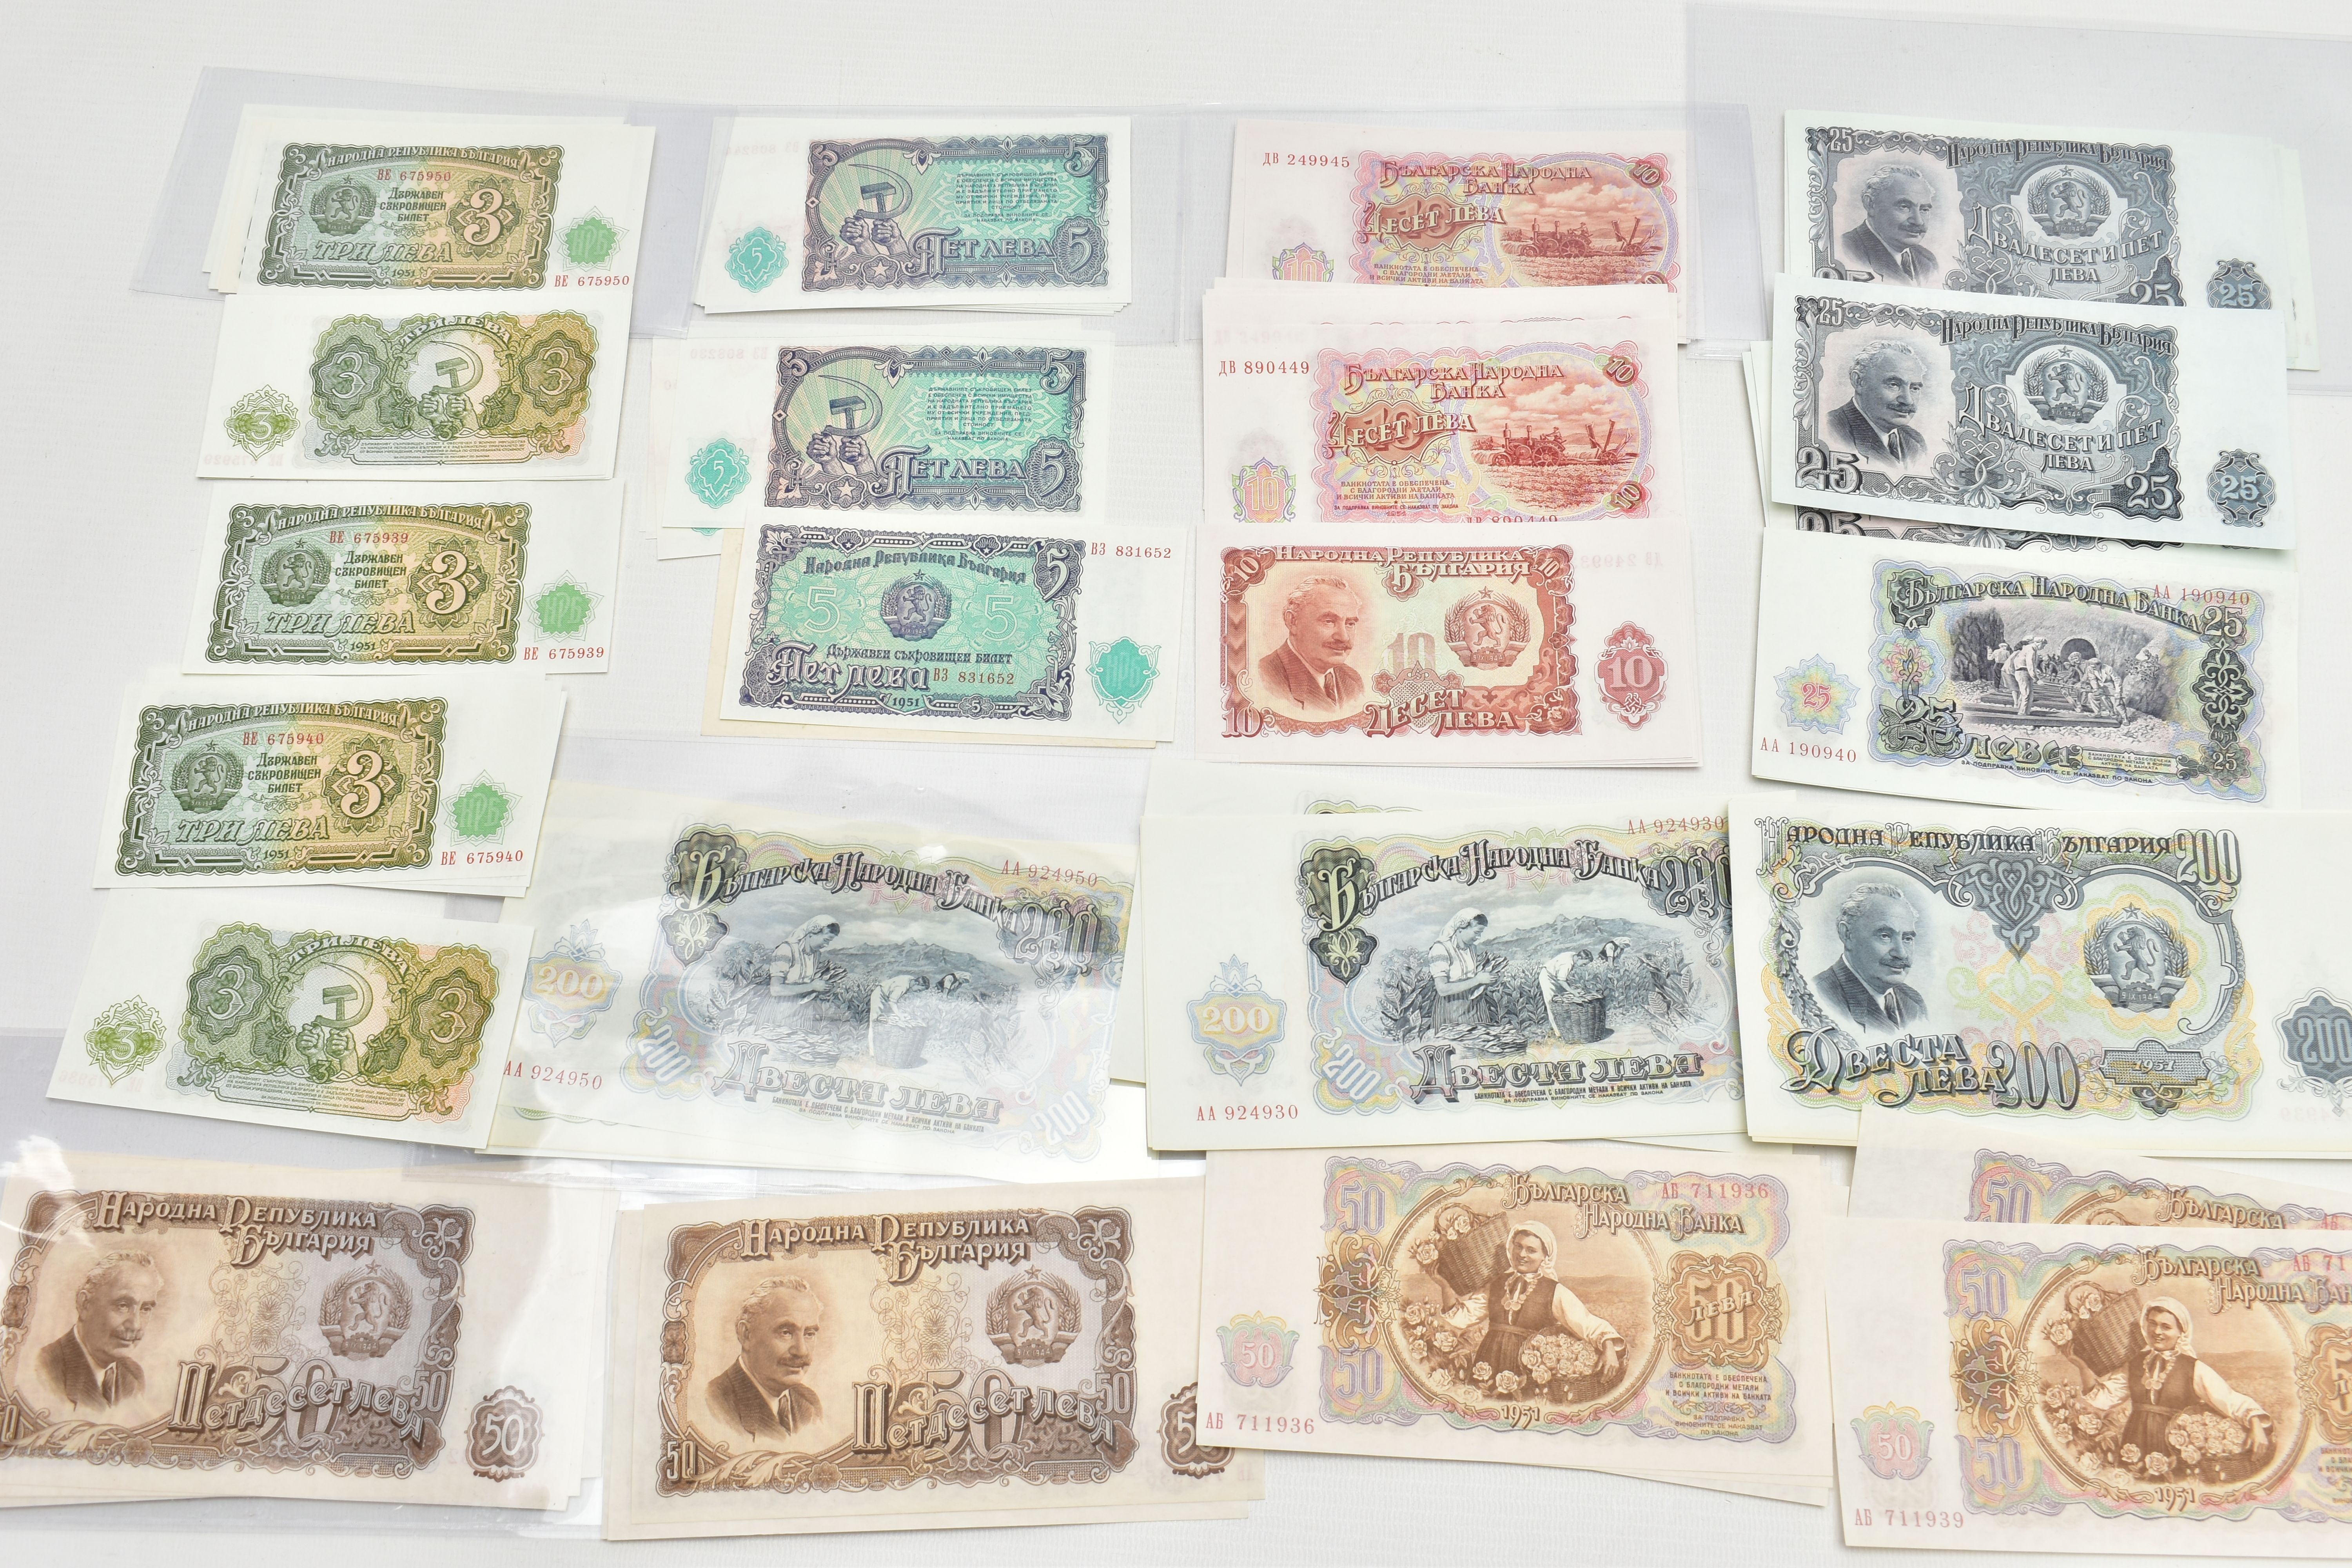 A SELECTION OF CRISP UNCIRCULATED BULGARIA BANKNOTES 1951, six packs of approx 17 Banknotes in